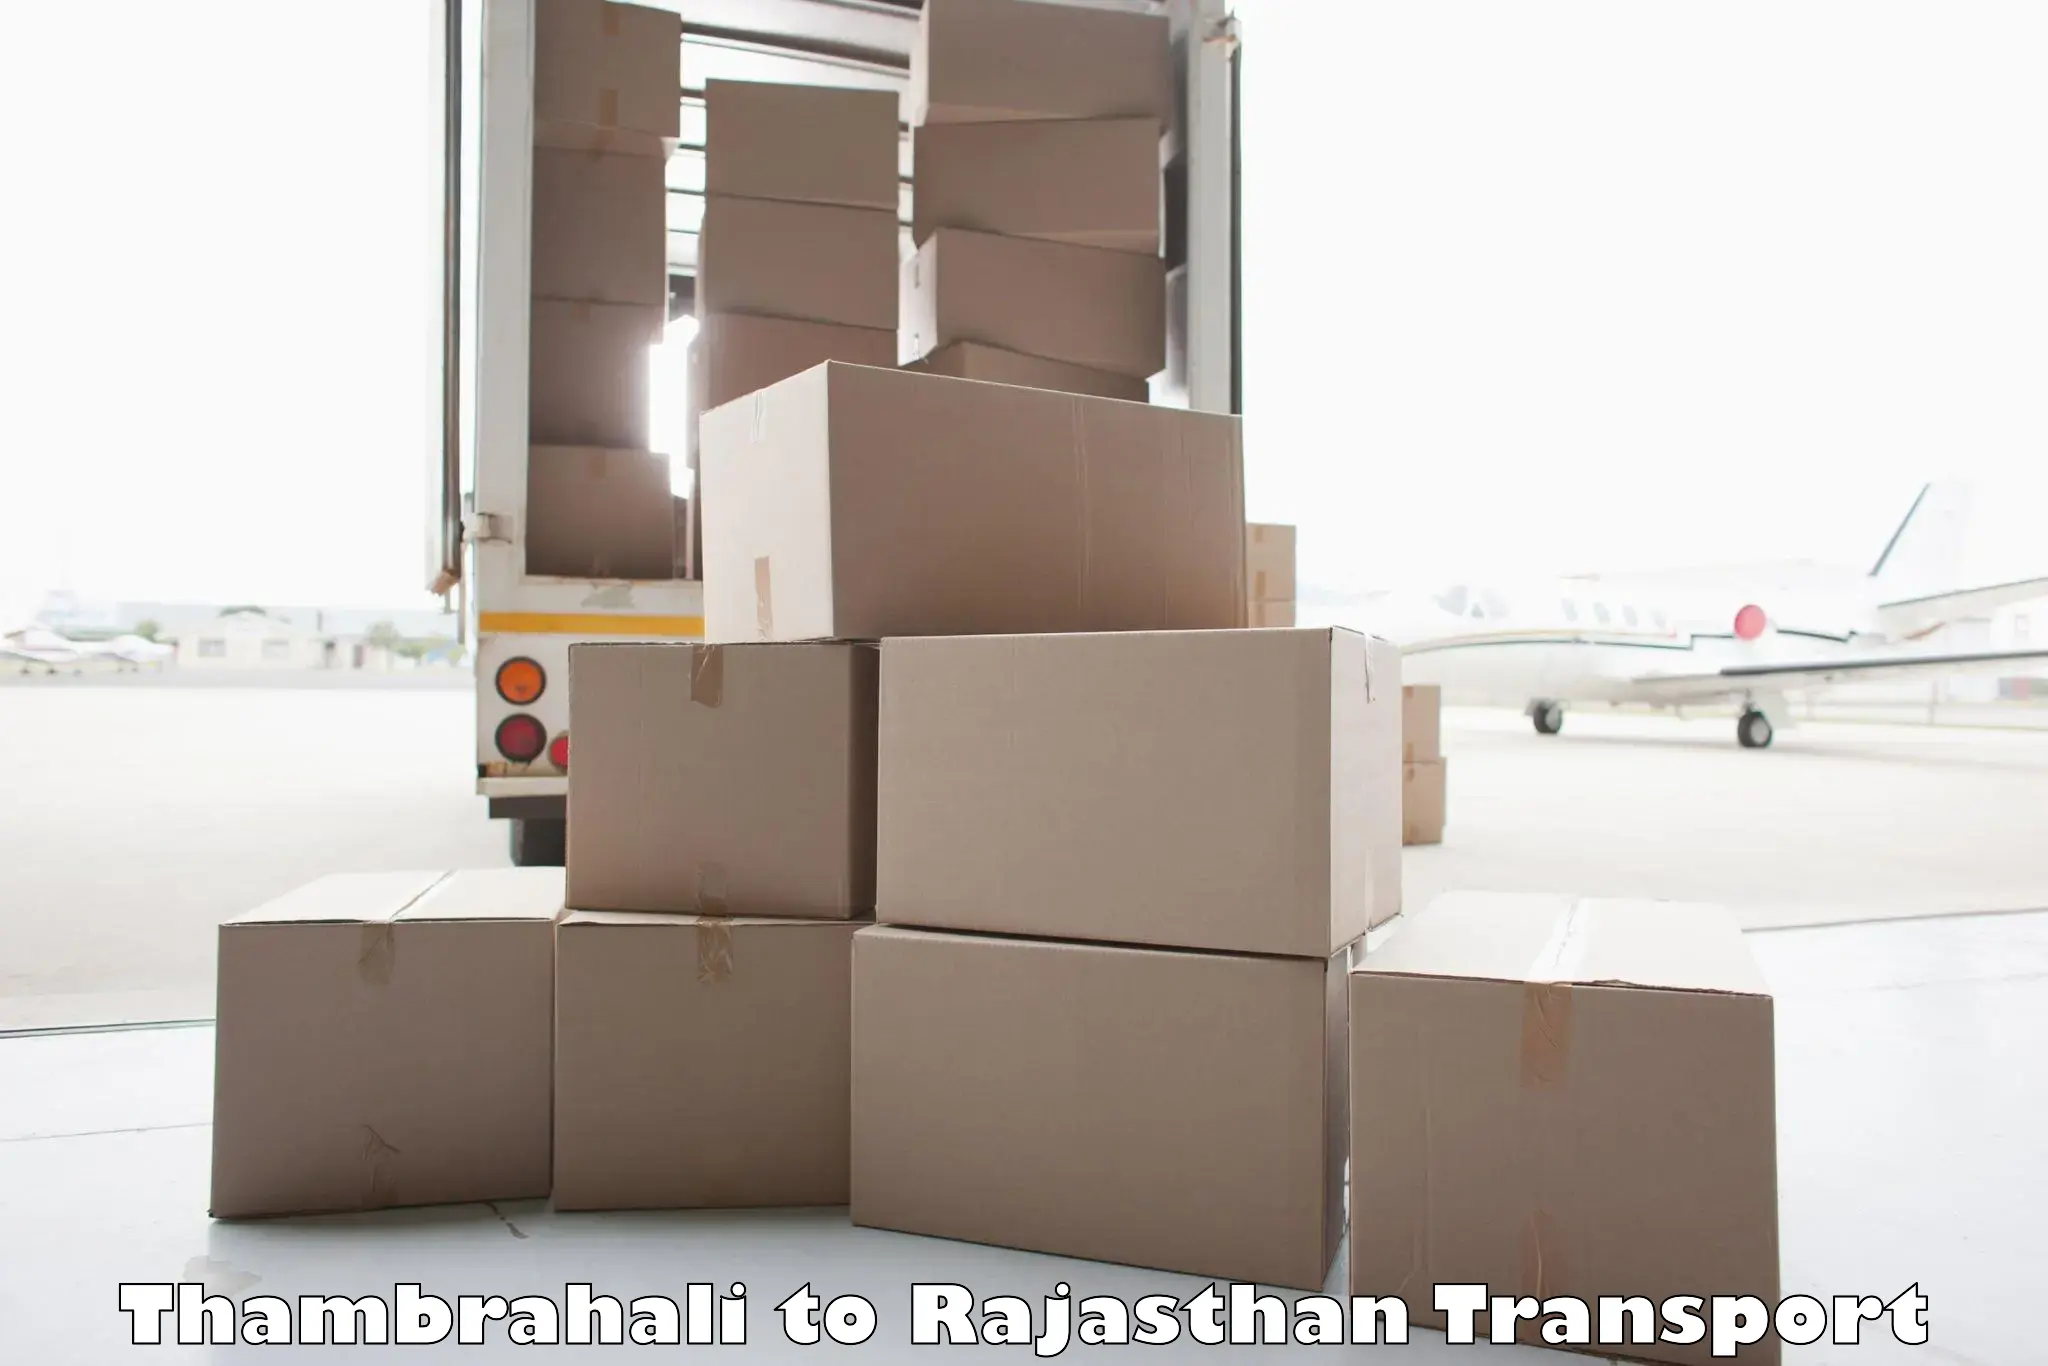 Container transport service Thambrahali to Nagaur